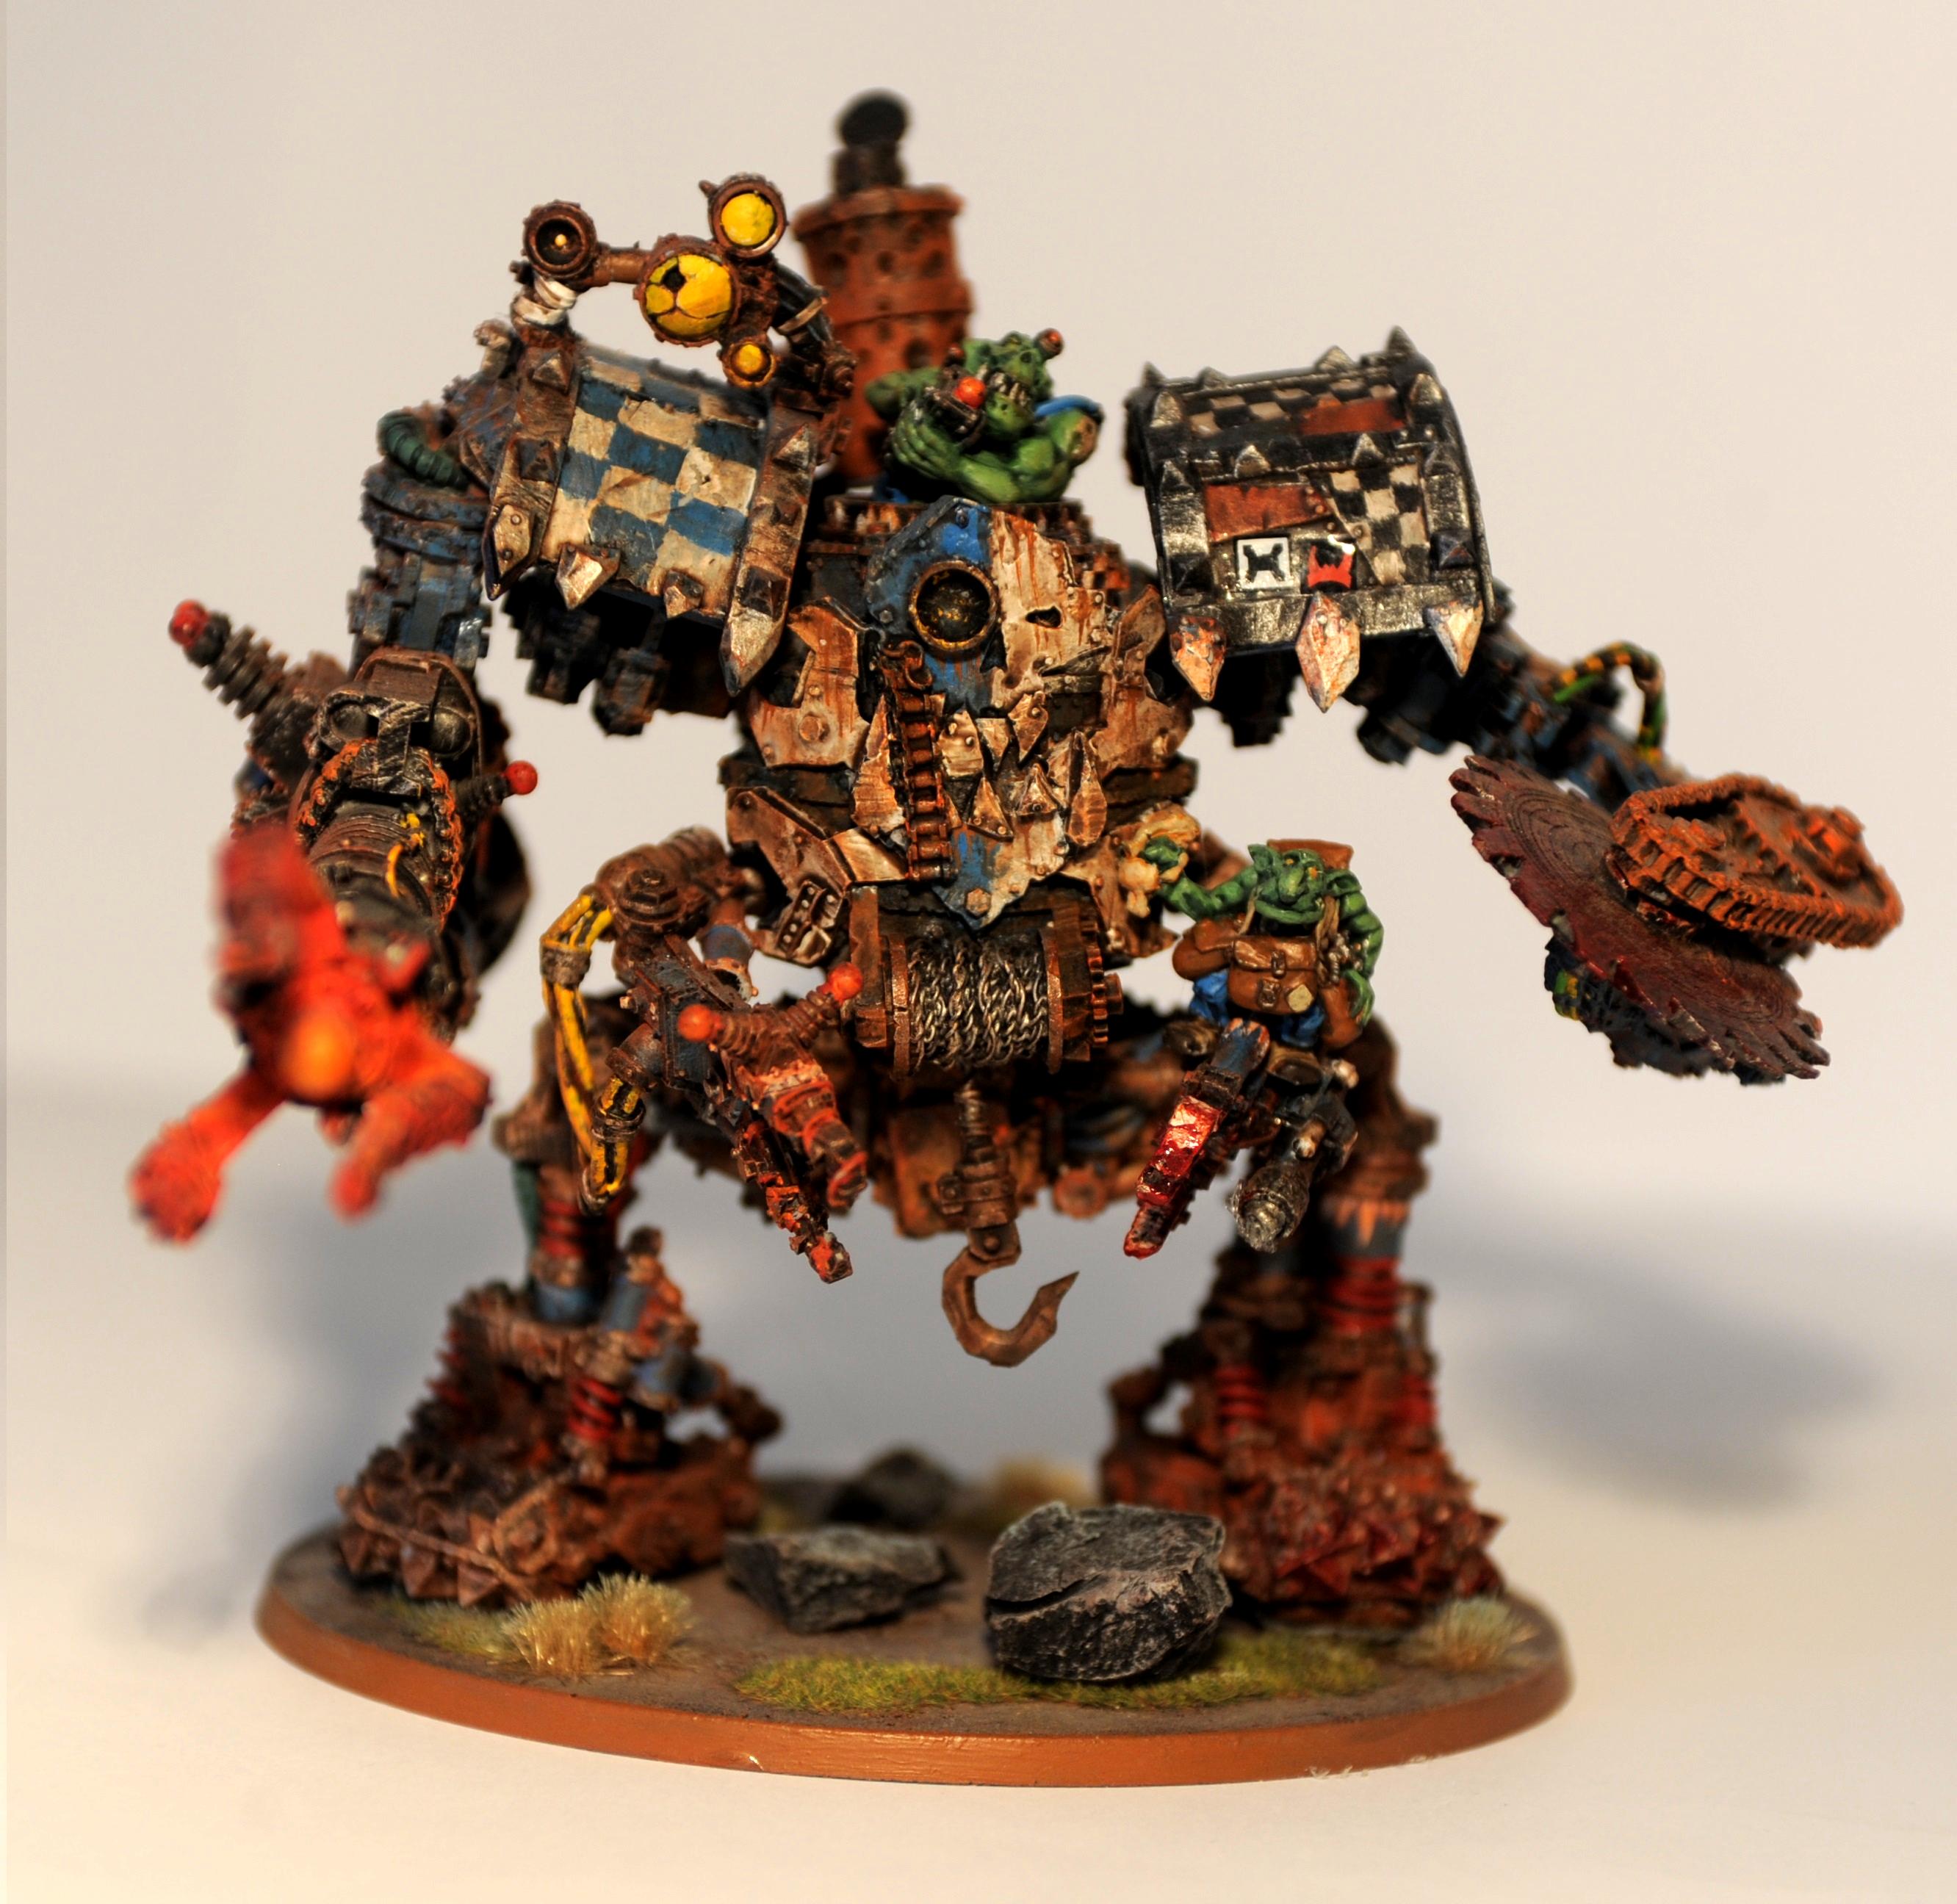 Deff Dread, Drednought, Forge World, Grot Riggers, Orcs, Warhammer 40,000